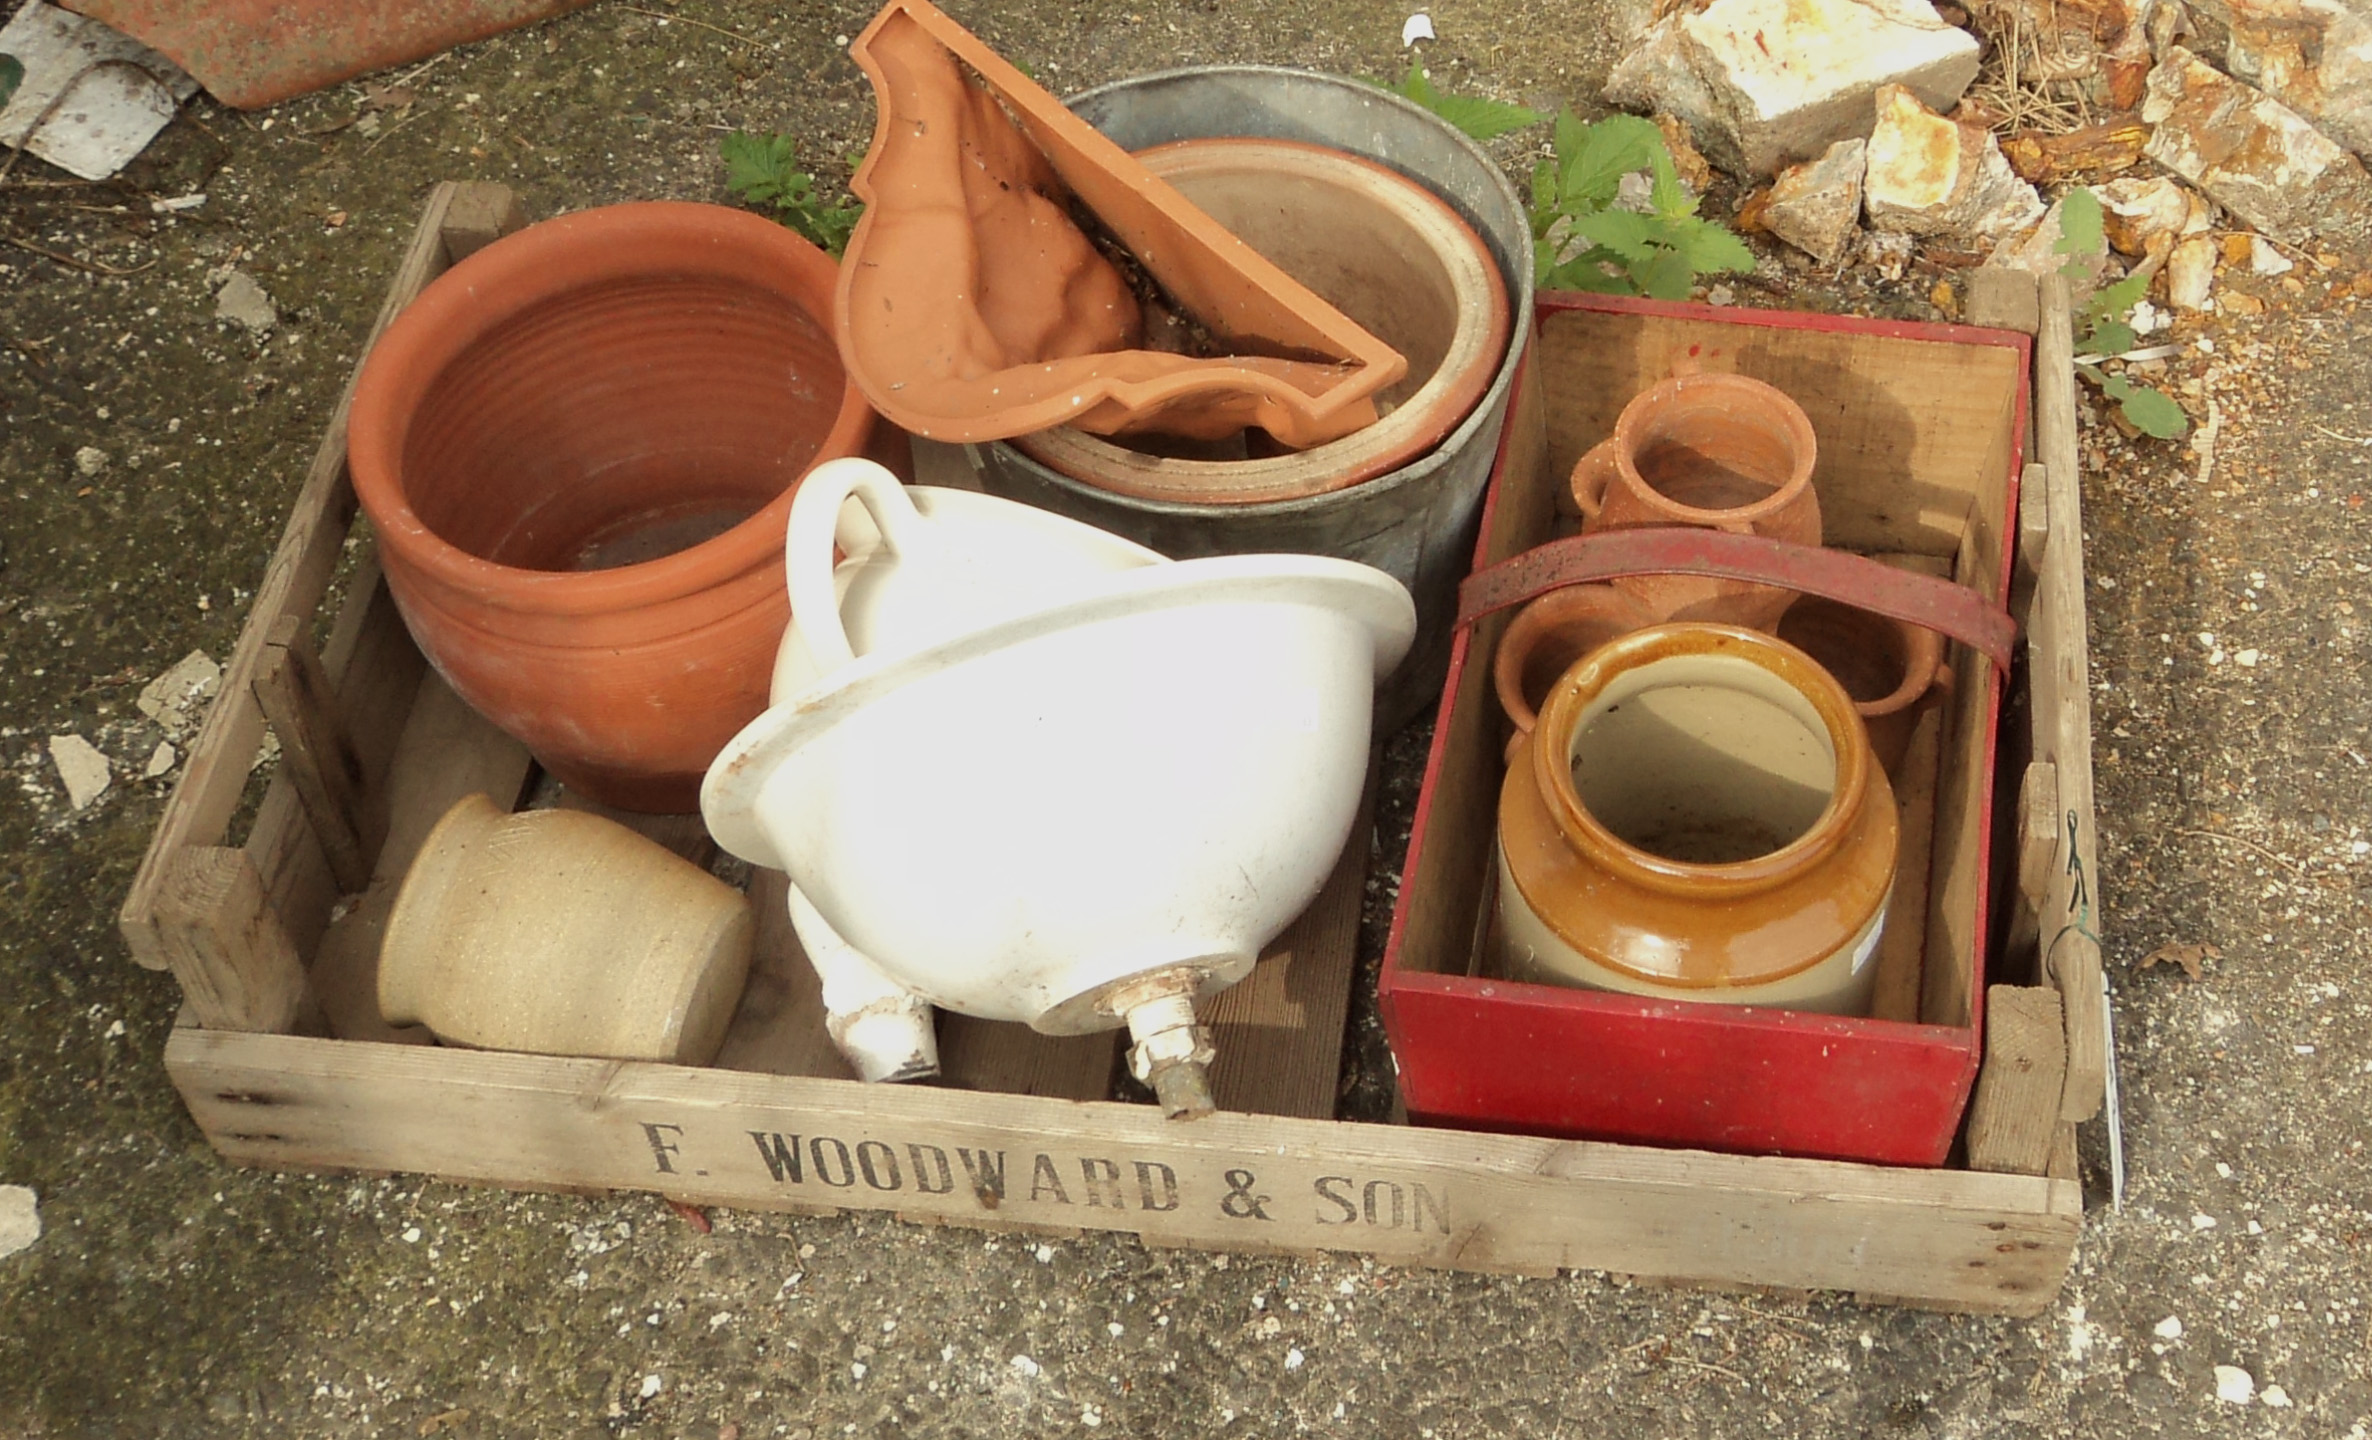 A chitting tray containing various terracotta plant pots, trug, wall pocket, etc.